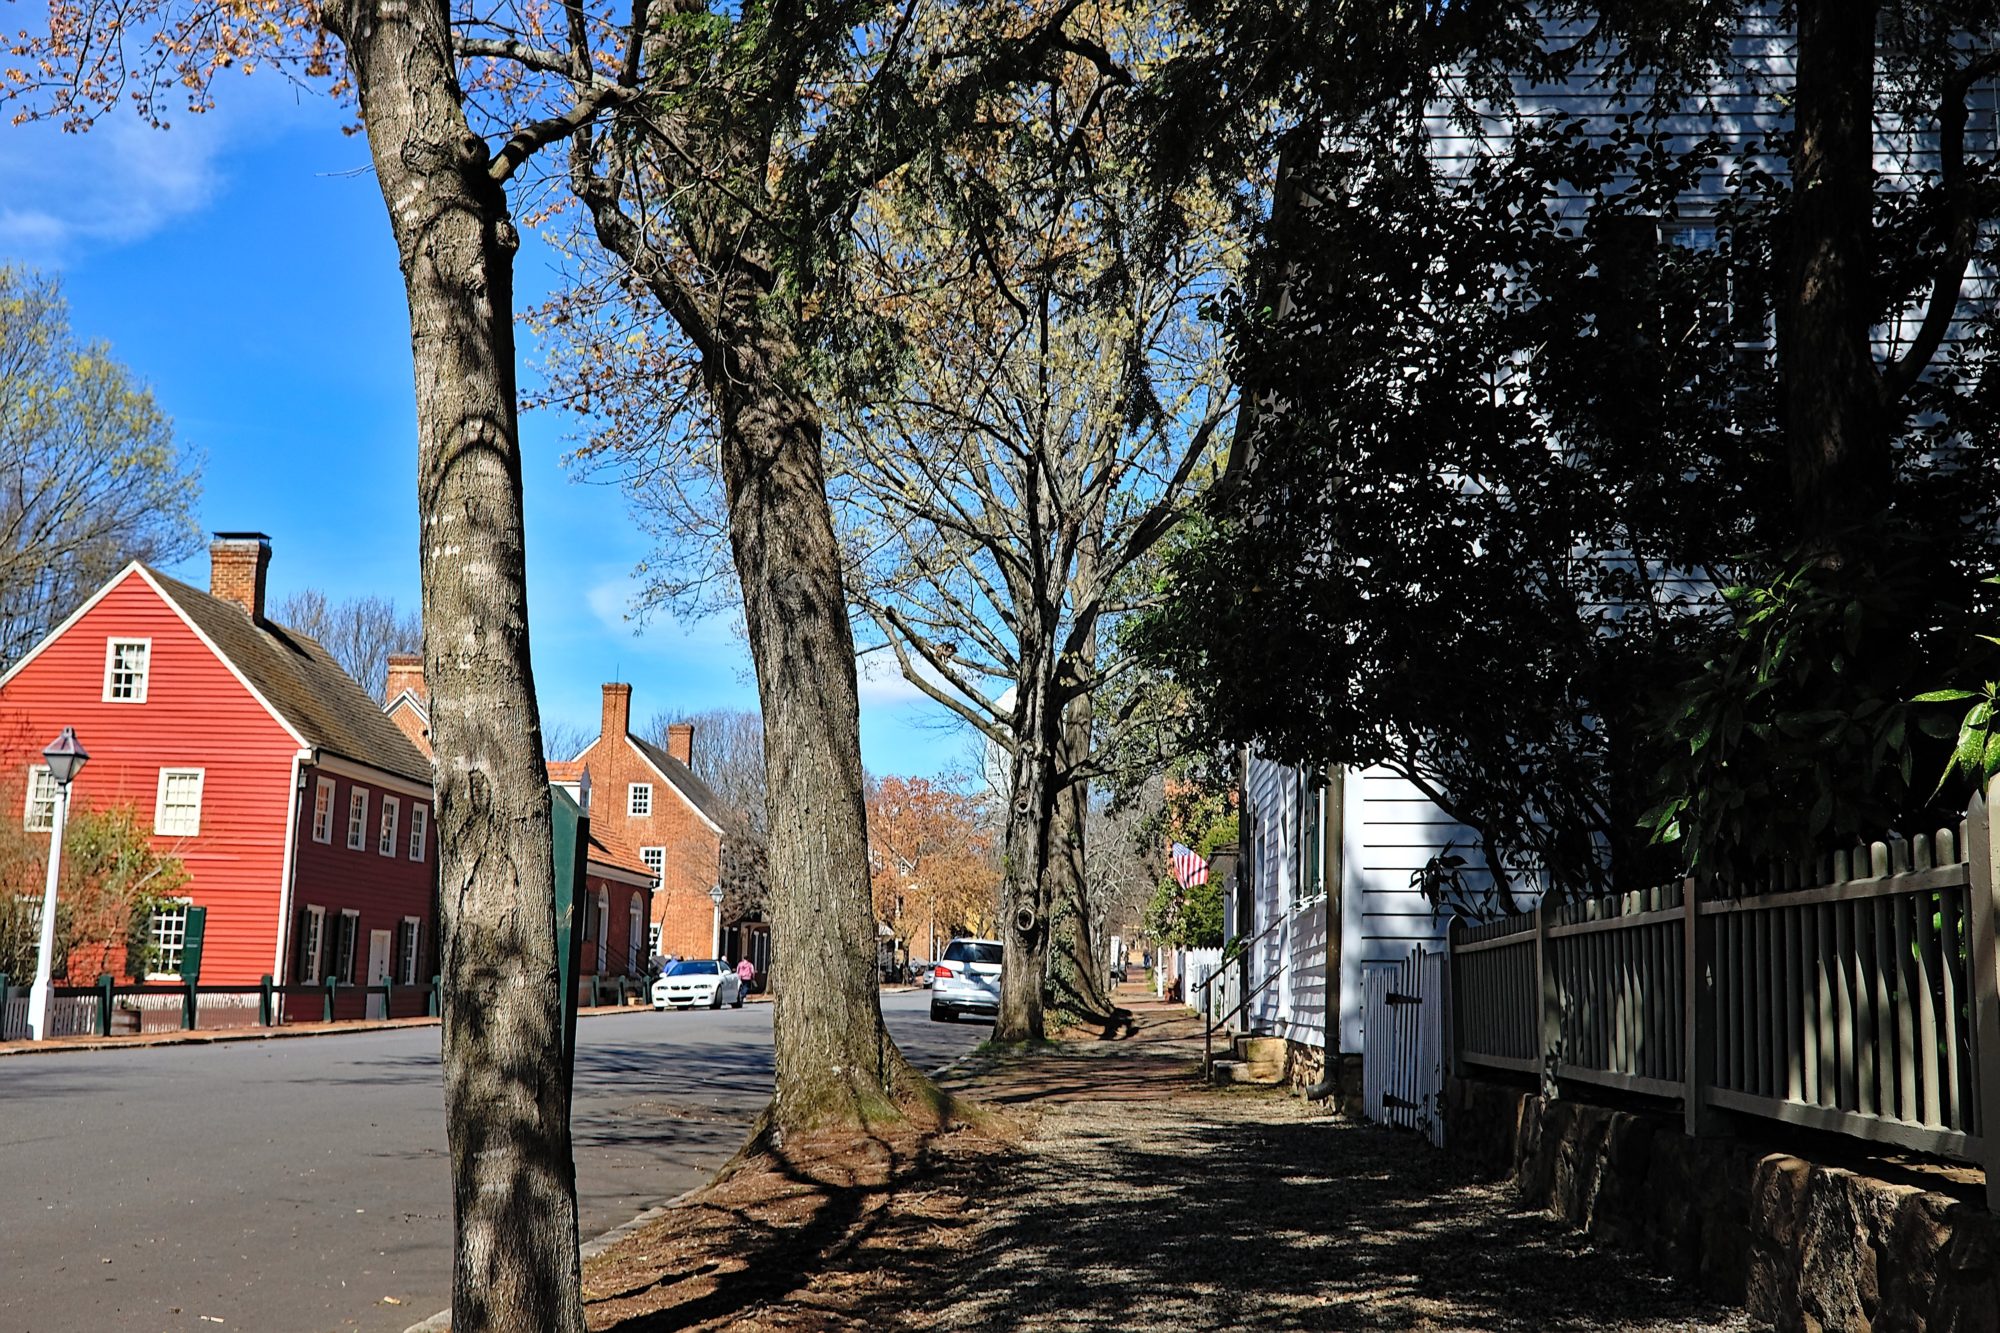 A view of Old Salem from a sidewalk